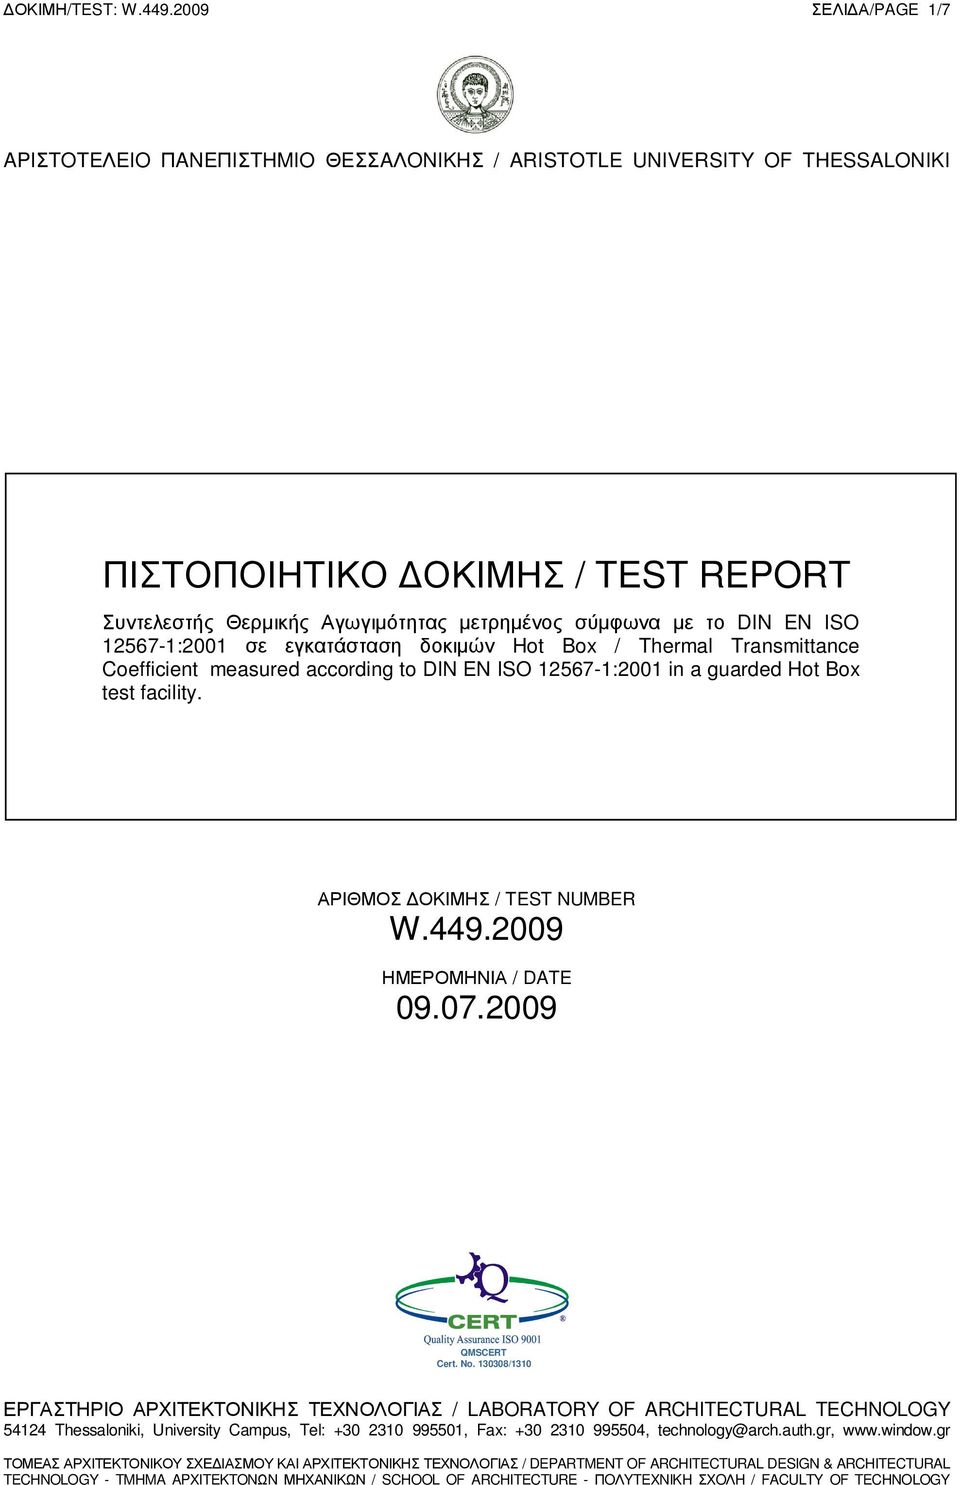 EN ISO 12567-1:2001 σε εγκατάσταση δοκιμών Hot Box / Thermal Transmittance Coefficient meaed according to DIN EN ISO 12567-1:2001 in a guarded Hot Box test facility. ΑΡΙΘΜΟΣ ΔΟΚΙΜΗΣ / TEST NUMBER W.